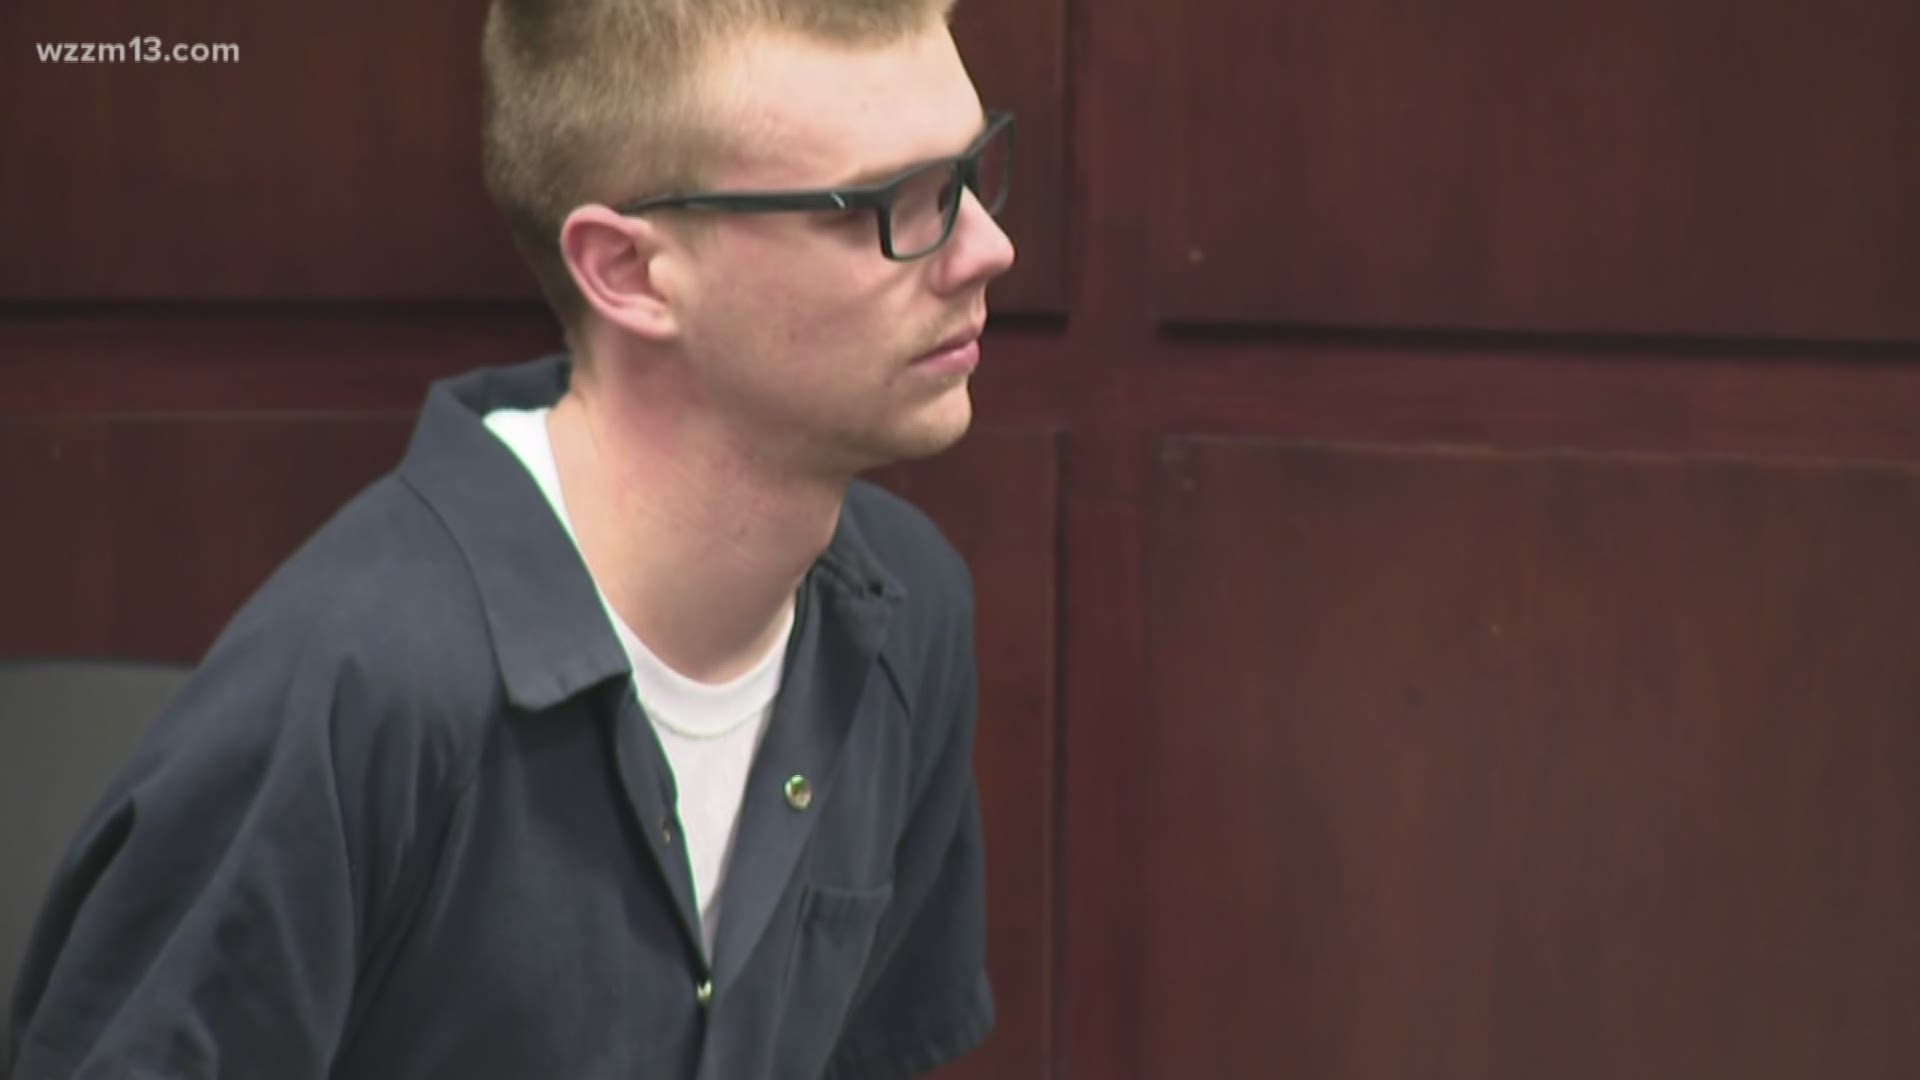 Cody Loomis is already charged with two counts of drunk driving causing death. Muskegon County Prosecutor D.J. Hilson told a Muskegon district judge he's evaluating adding two counts of second degree murder charges.